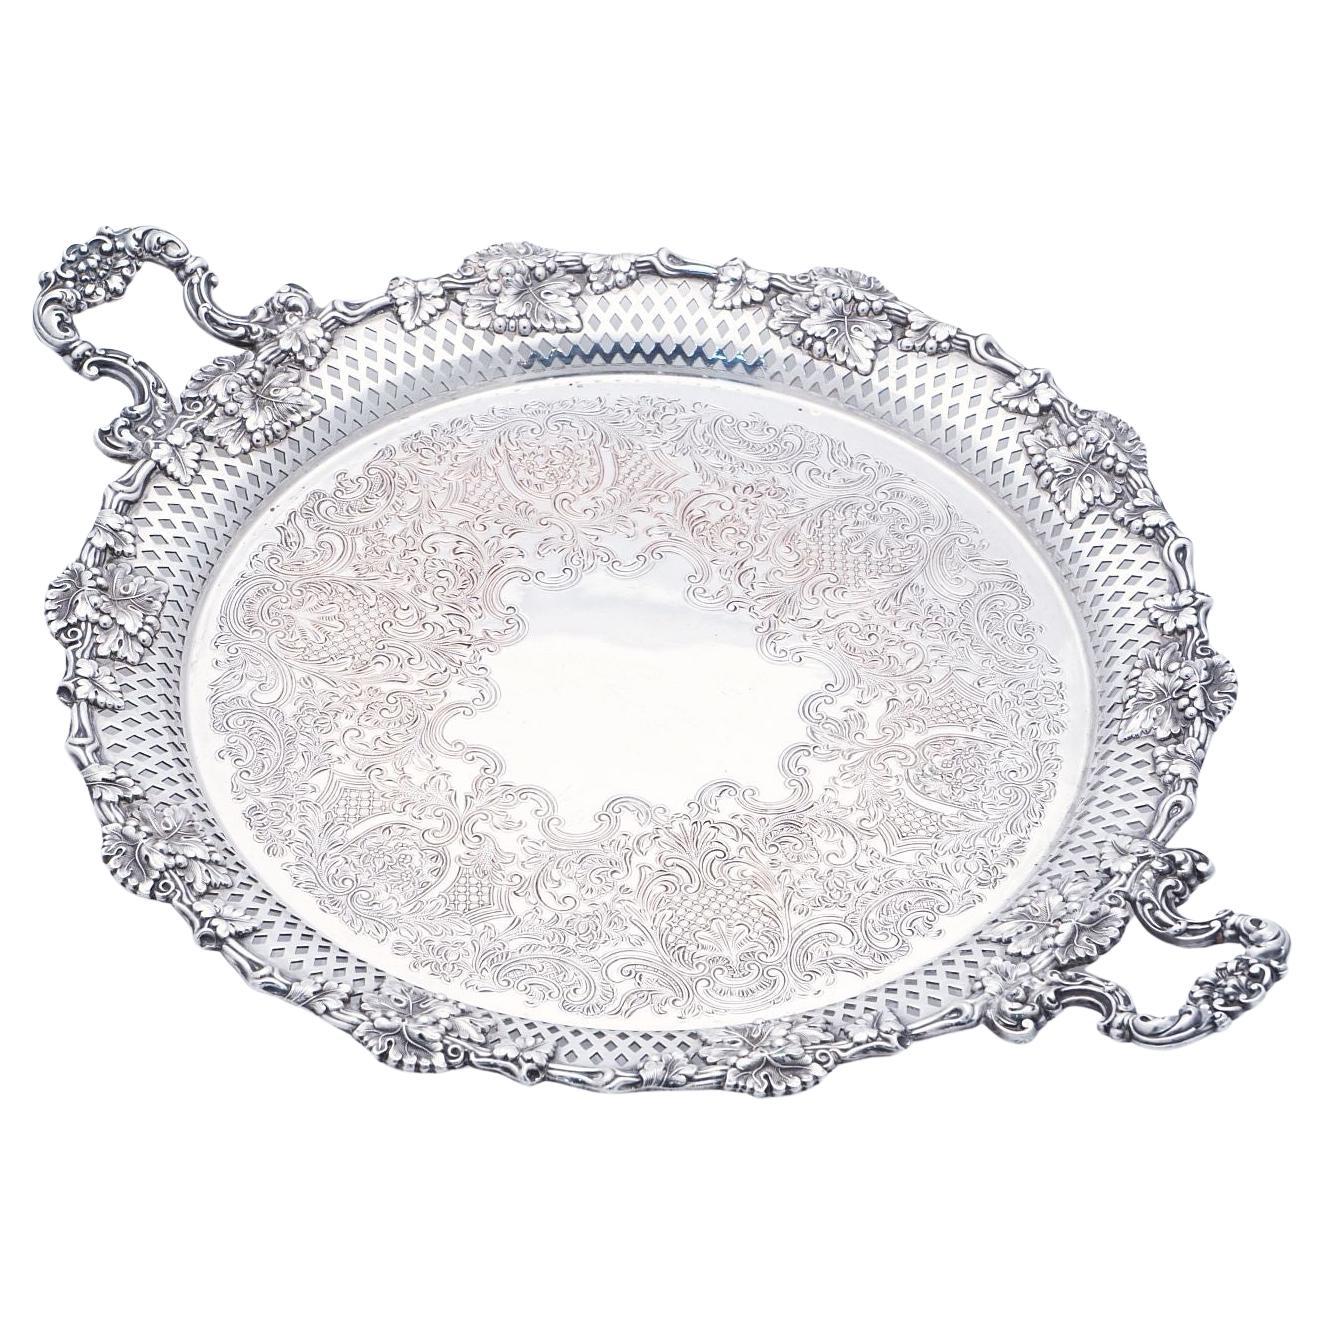  Large English Silver Round Serving or Drinks Tray with Handles For Sale